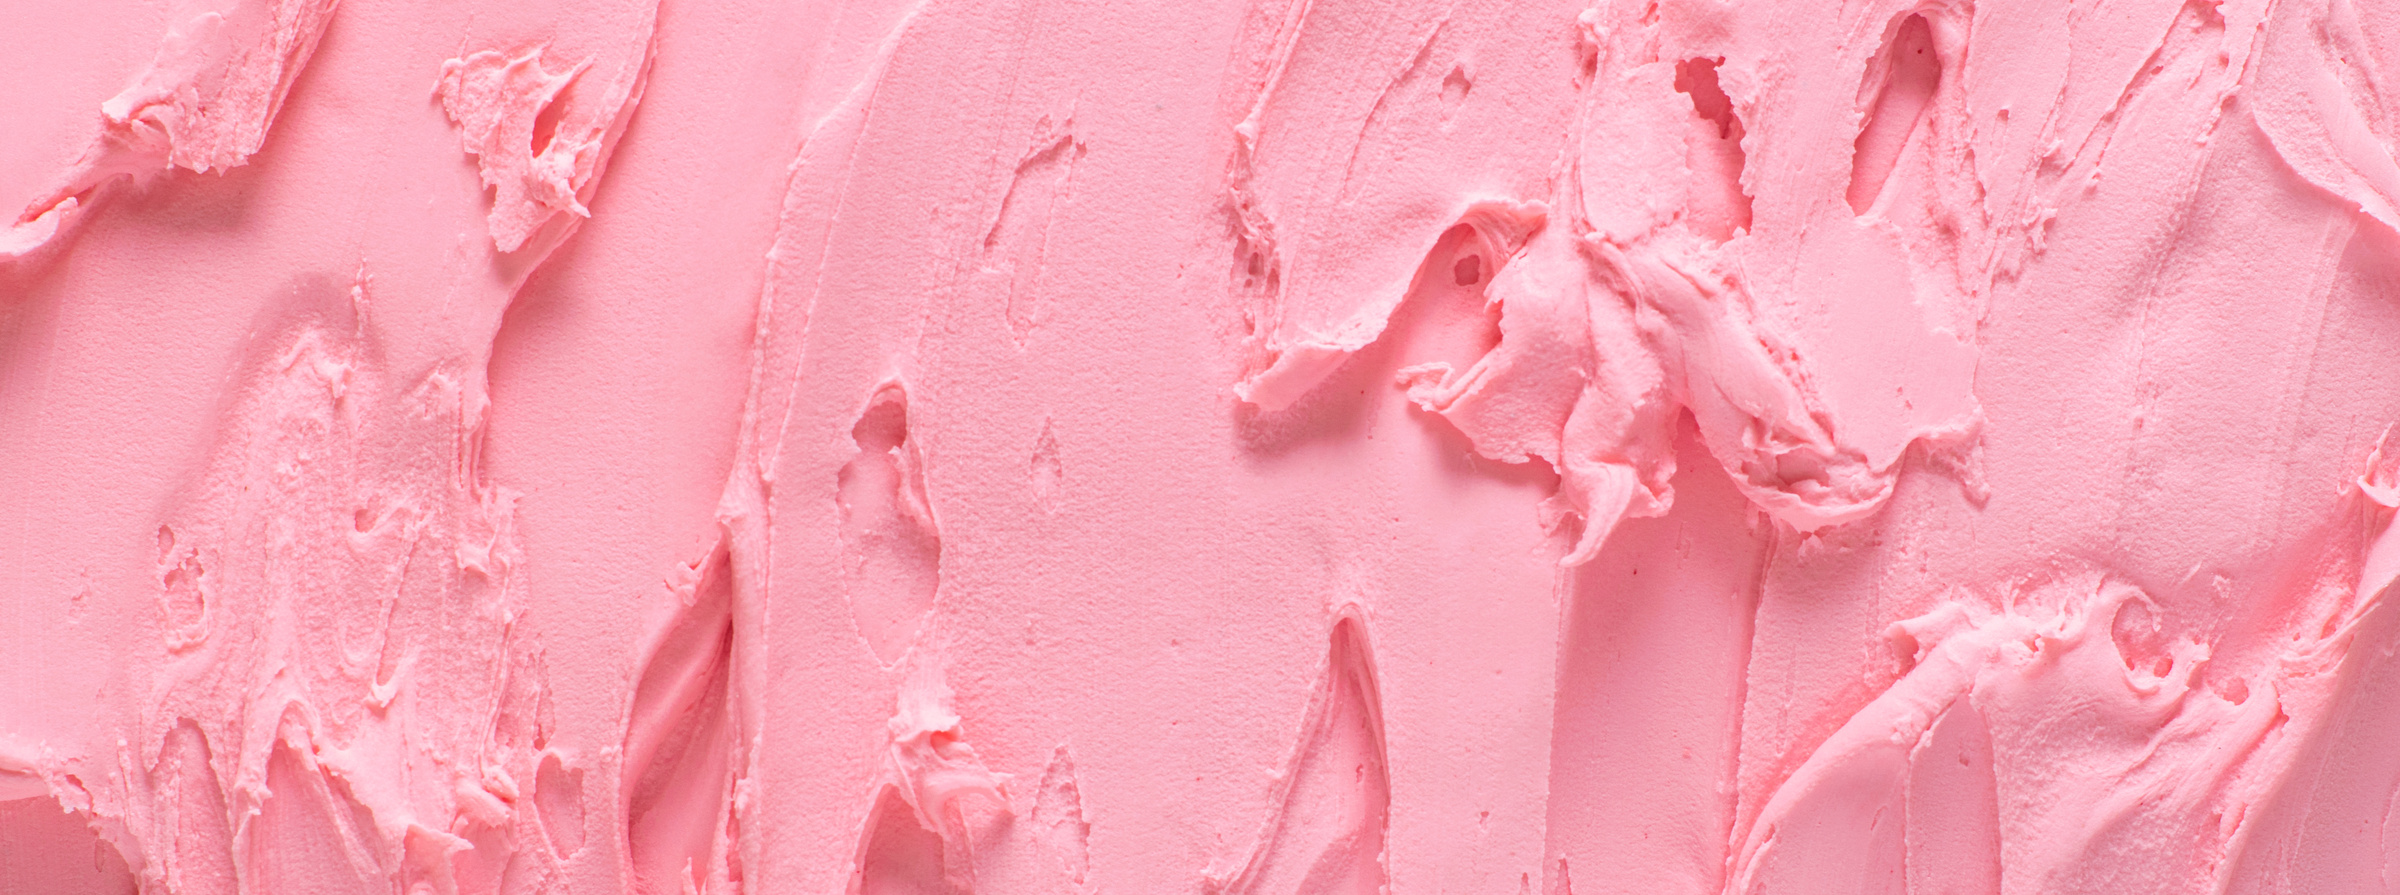 Texture surface of ice cream. Background of strawberry ice cream close-up. Banner